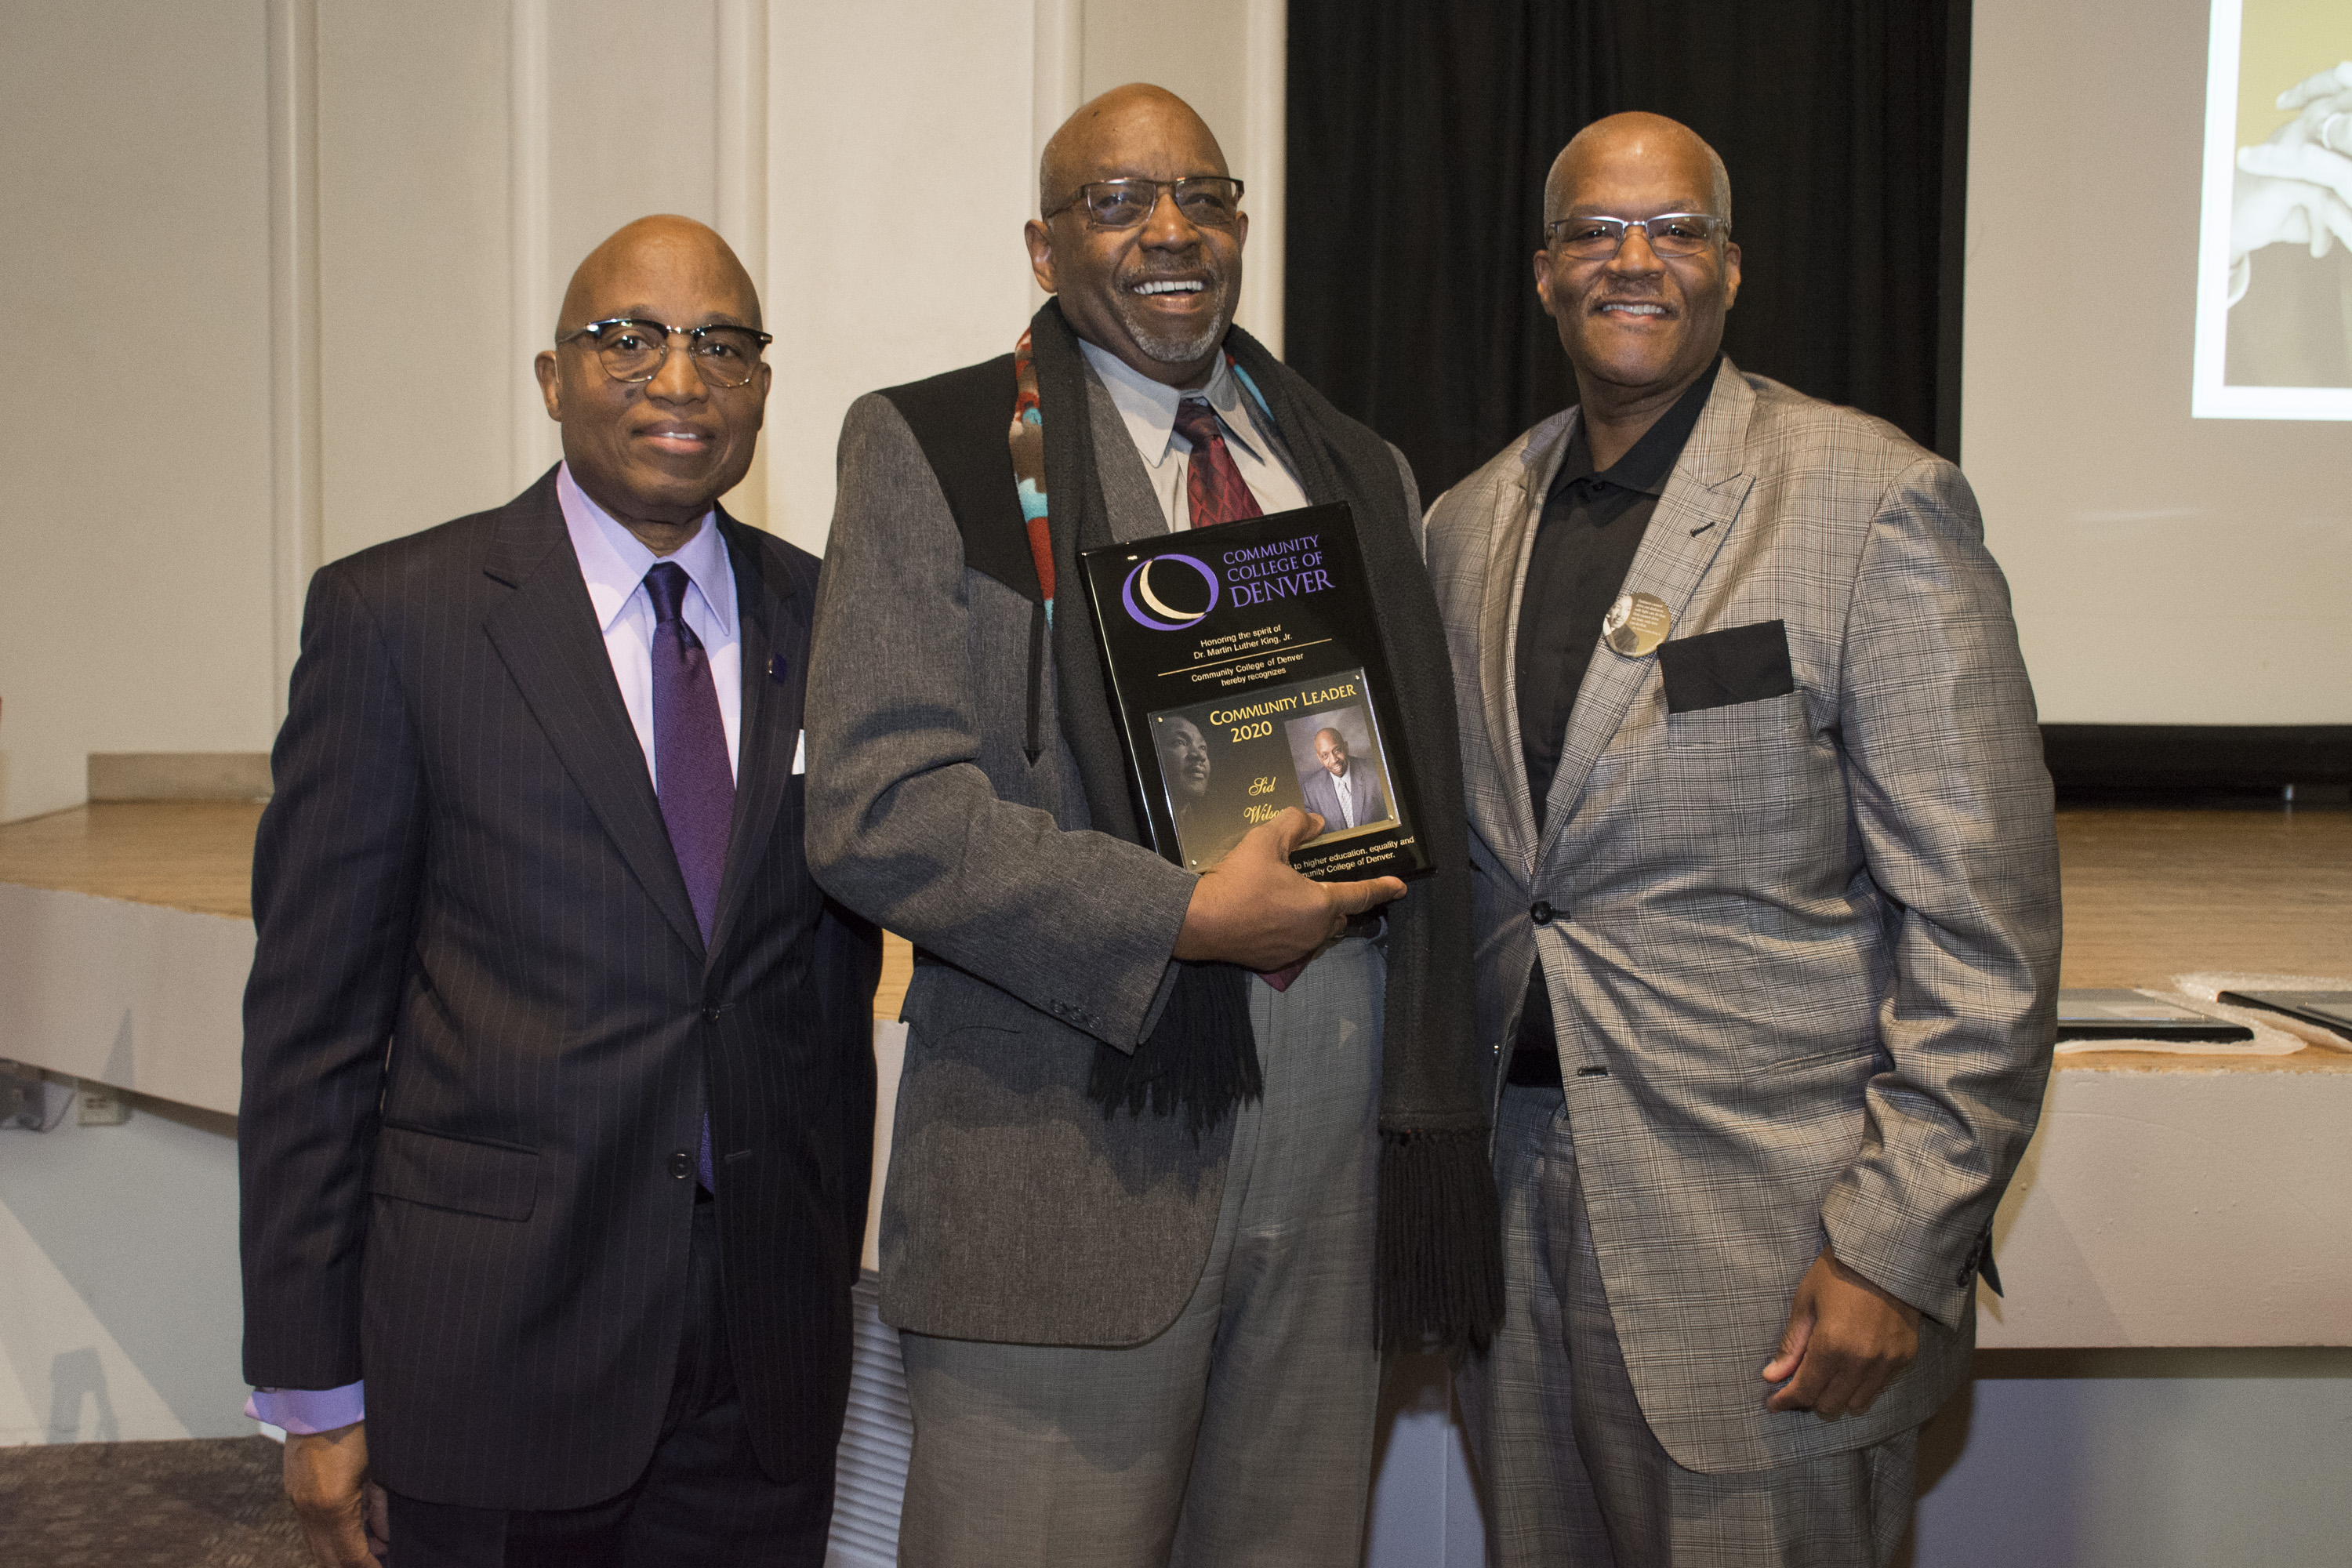 Community Leader award recipient Sid Wilson with CCD President Everette Freeman and Kevin Williams.